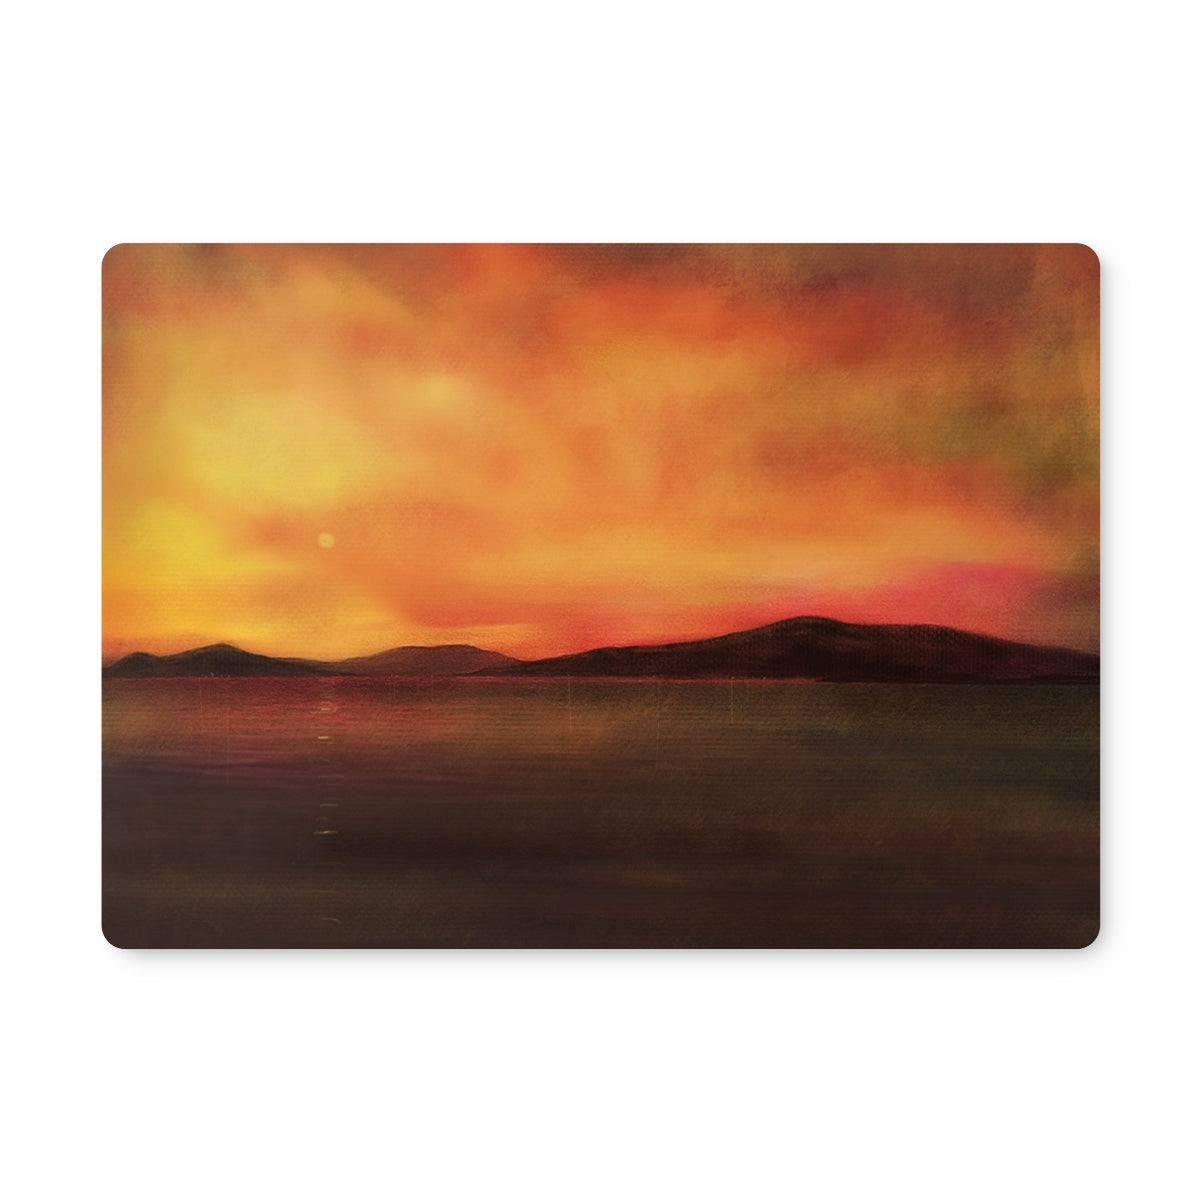 Harris Sunset Art Gifts Placemat-Placemats-Hebridean Islands Art Gallery-2 Placemats-Paintings, Prints, Homeware, Art Gifts From Scotland By Scottish Artist Kevin Hunter